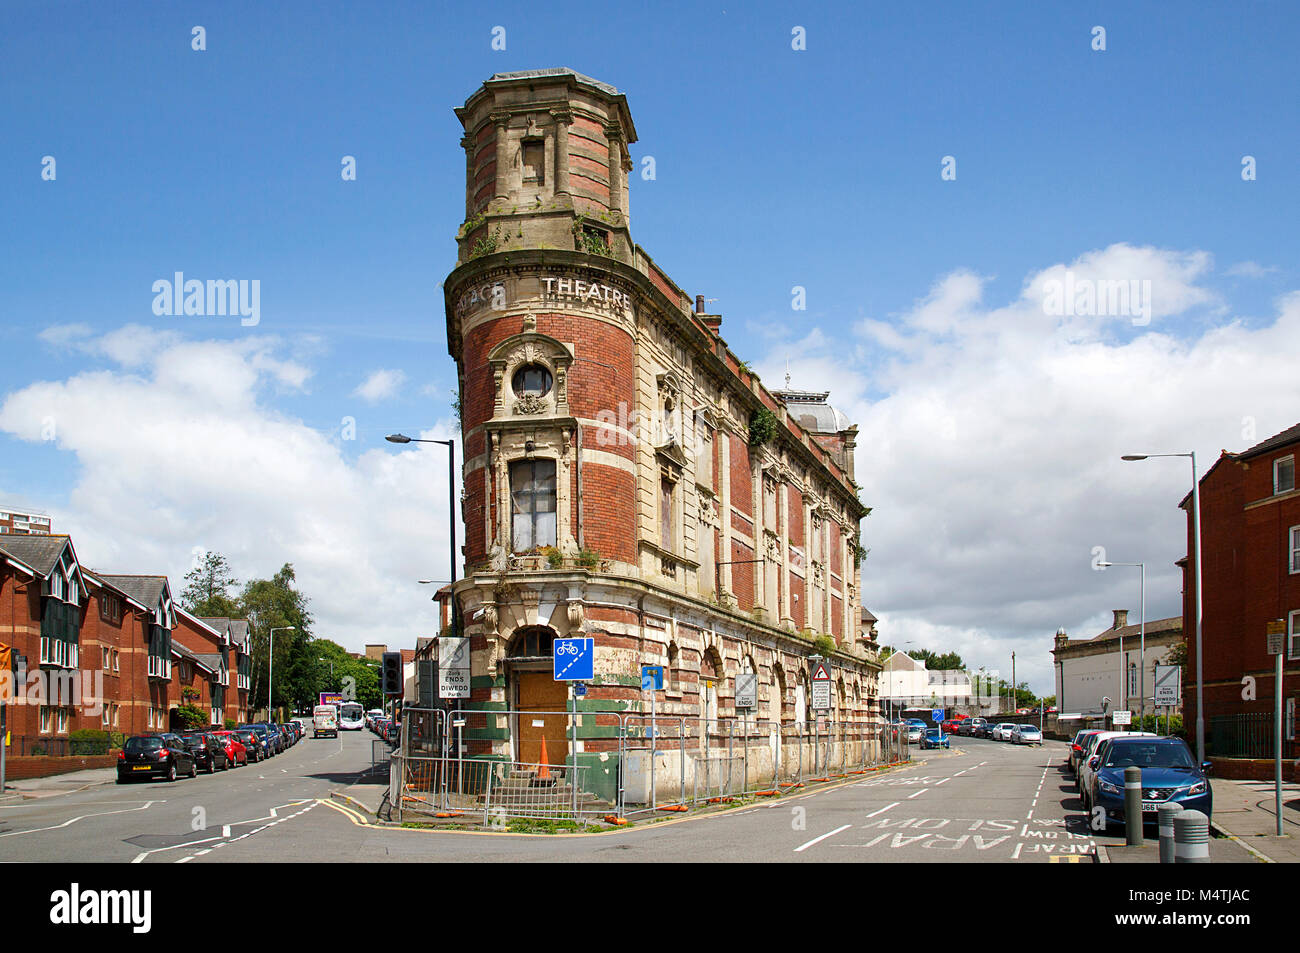 Swansea, UK: June 12, 2017: The Palace Theatre is recognisable for its distinctive wedge shape. It was built in 1888 as a traditional music hall. Stock Photo